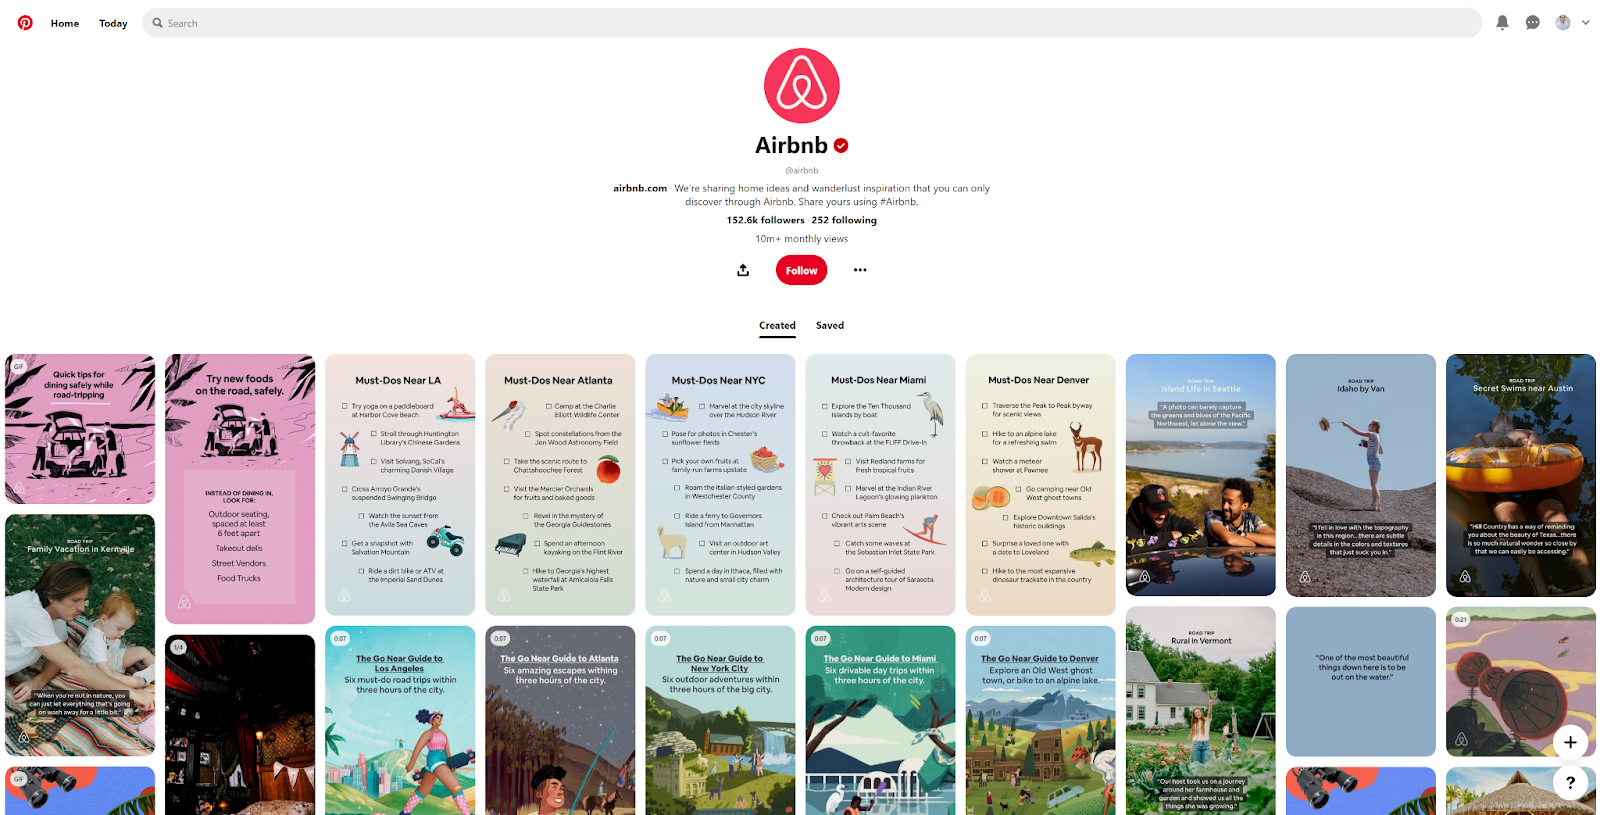 Airbnb's Pinterest page